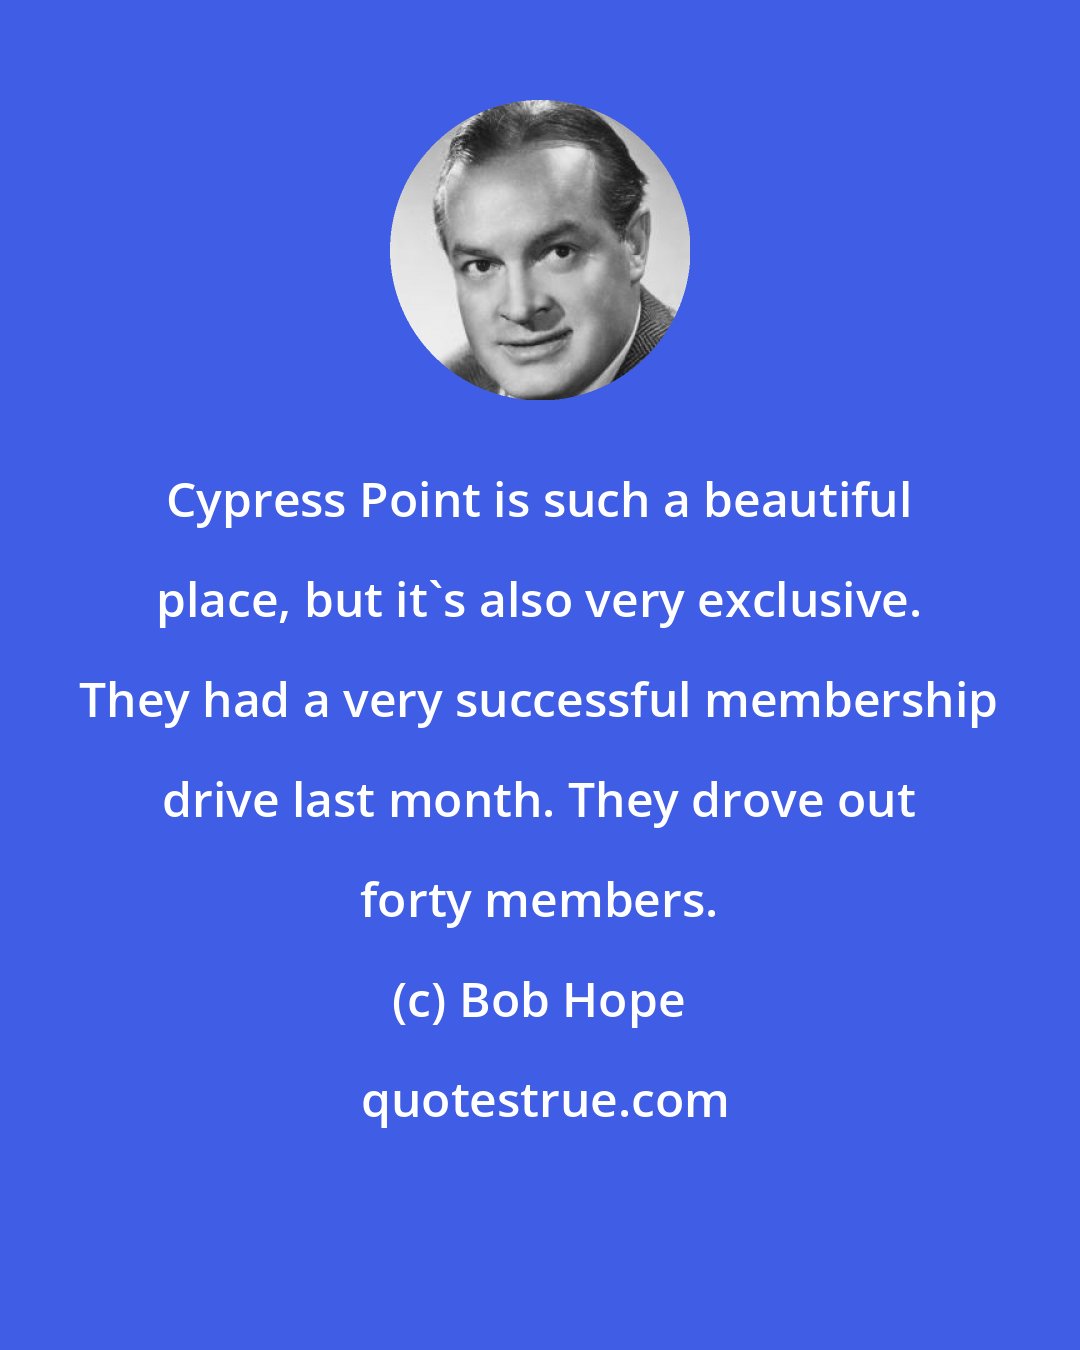 Bob Hope: Cypress Point is such a beautiful place, but it's also very exclusive. They had a very successful membership drive last month. They drove out forty members.